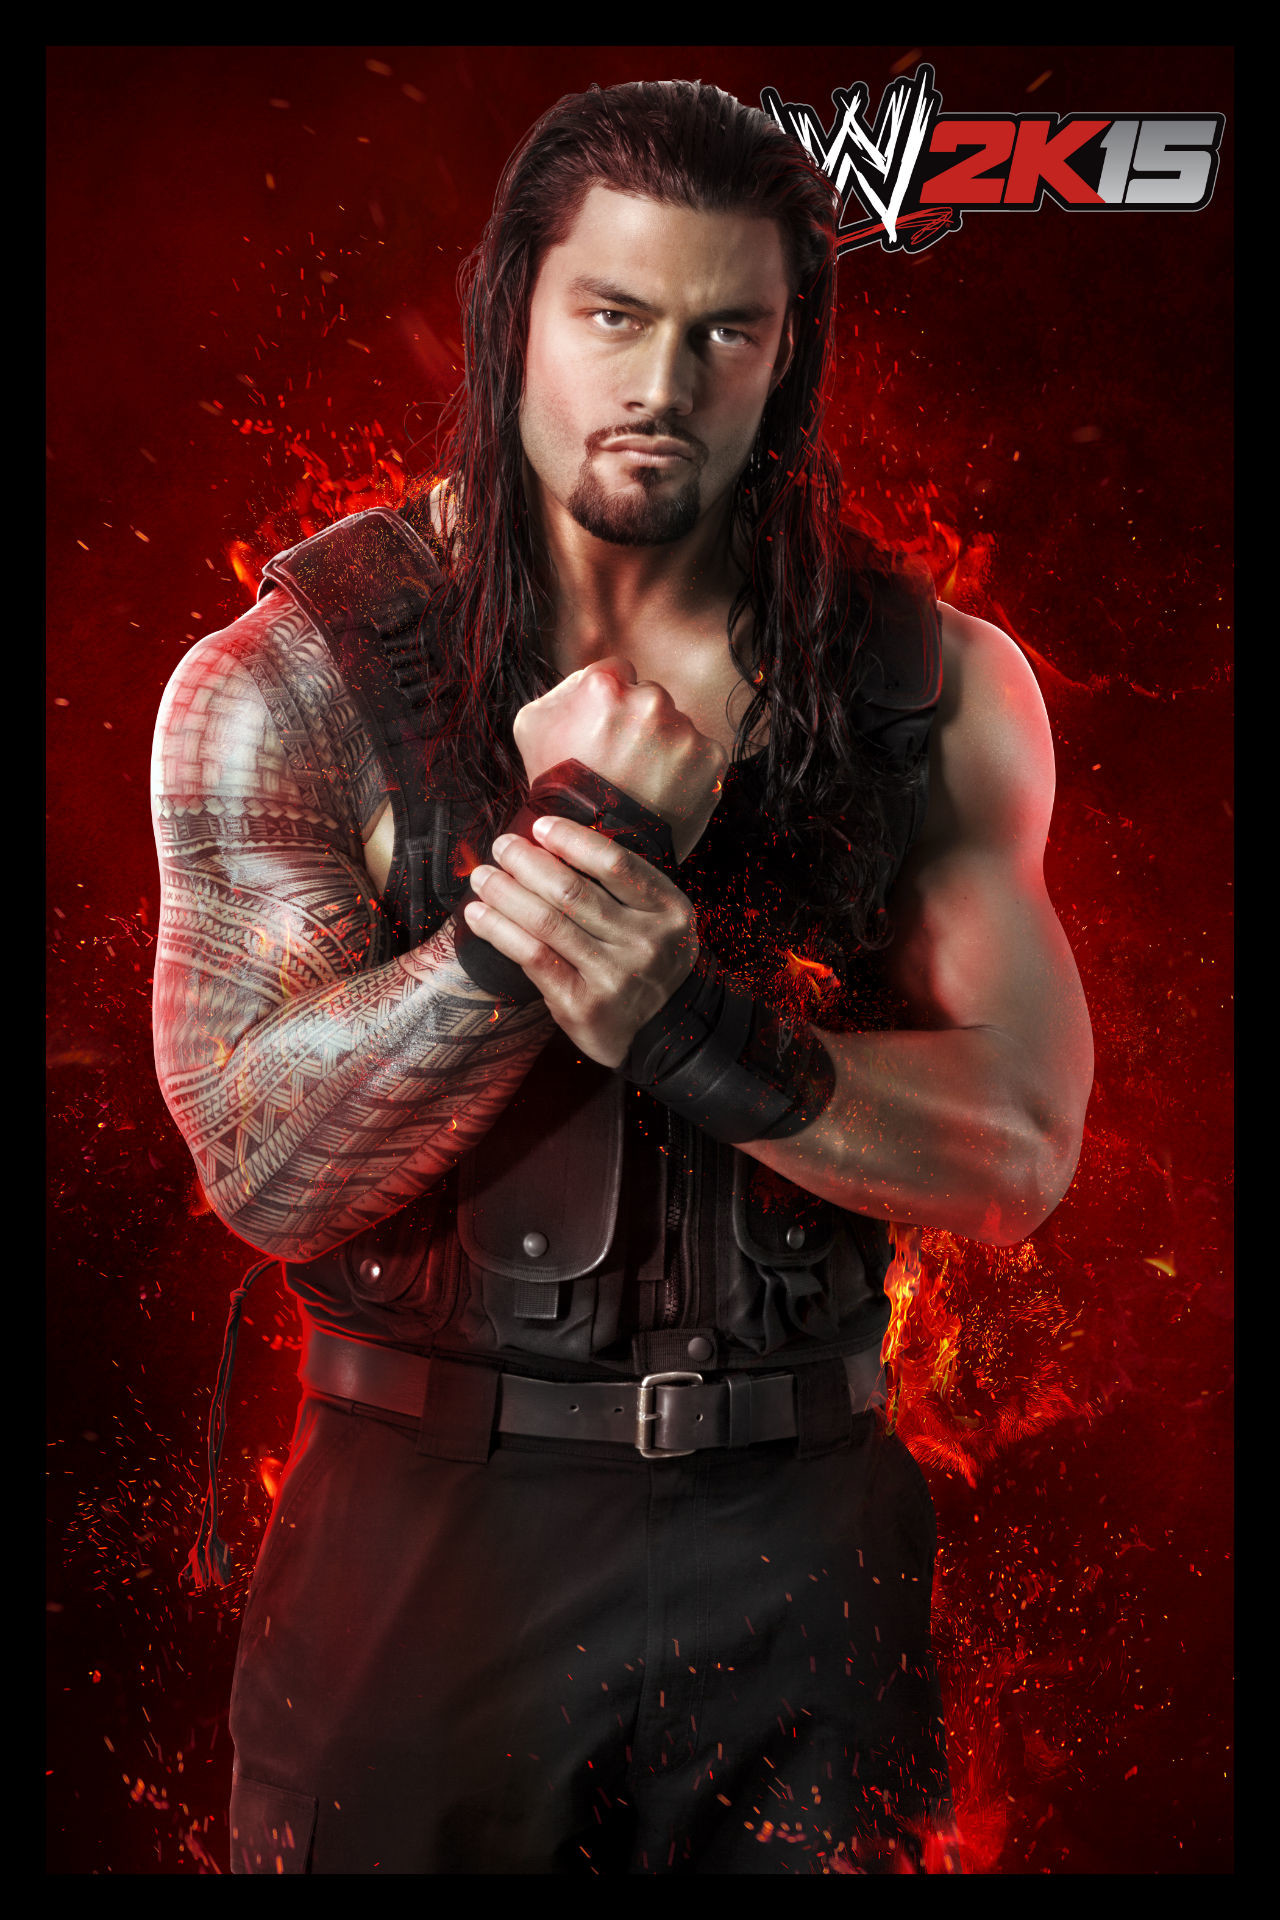 1280x1920 Roman Reigns images WWE 2K15 HD wallpaper and background photos